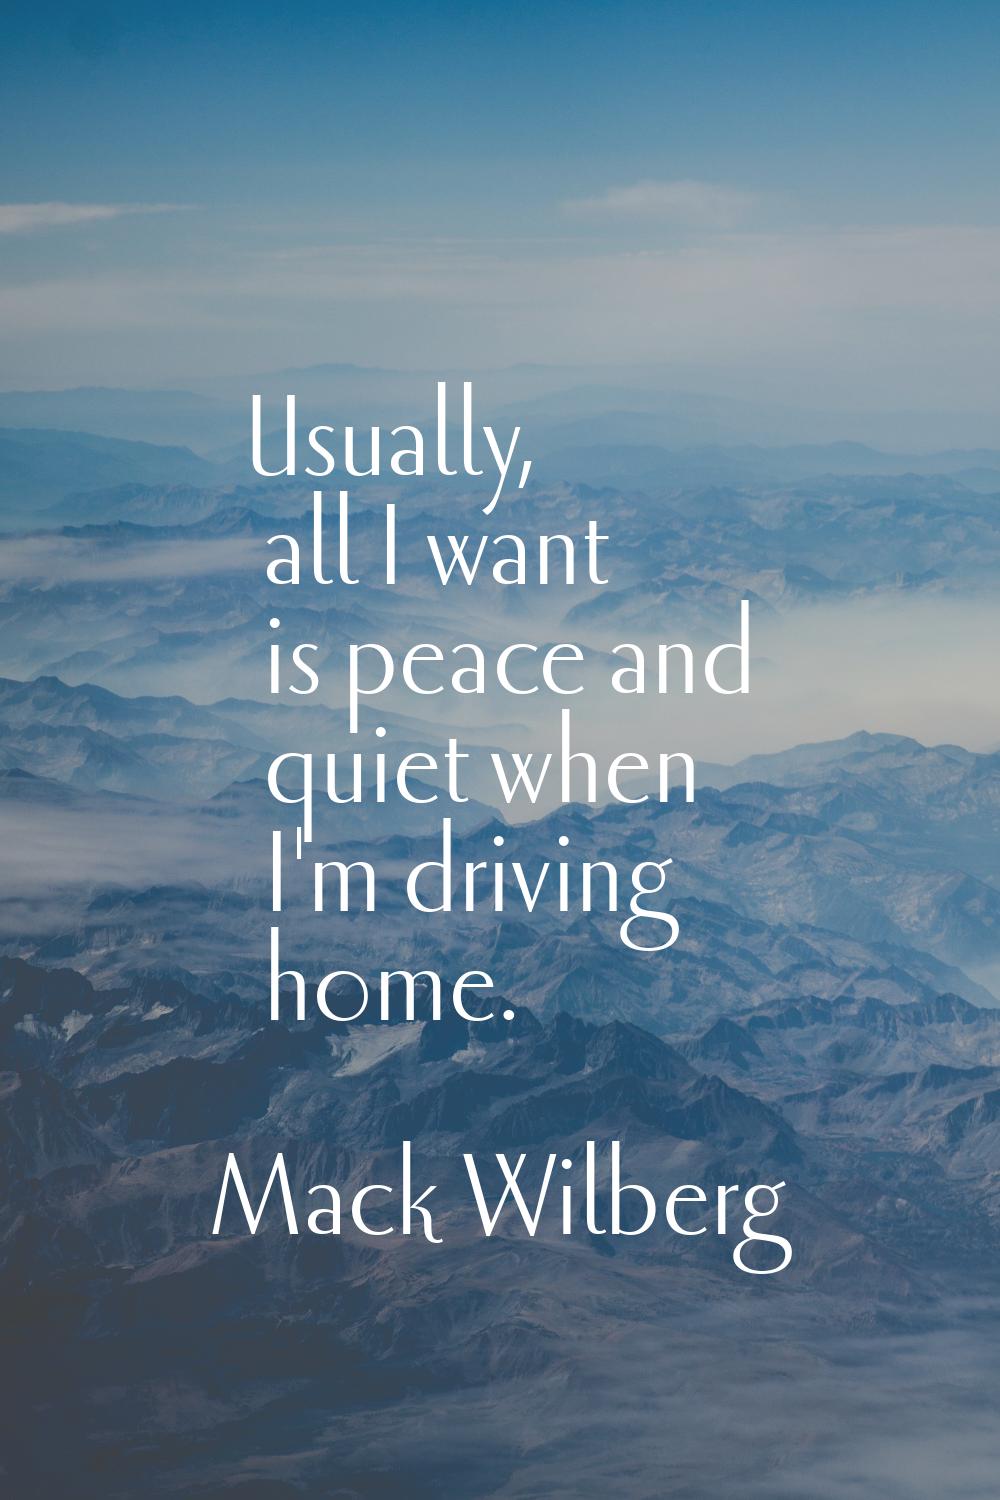 Usually, all I want is peace and quiet when I'm driving home.